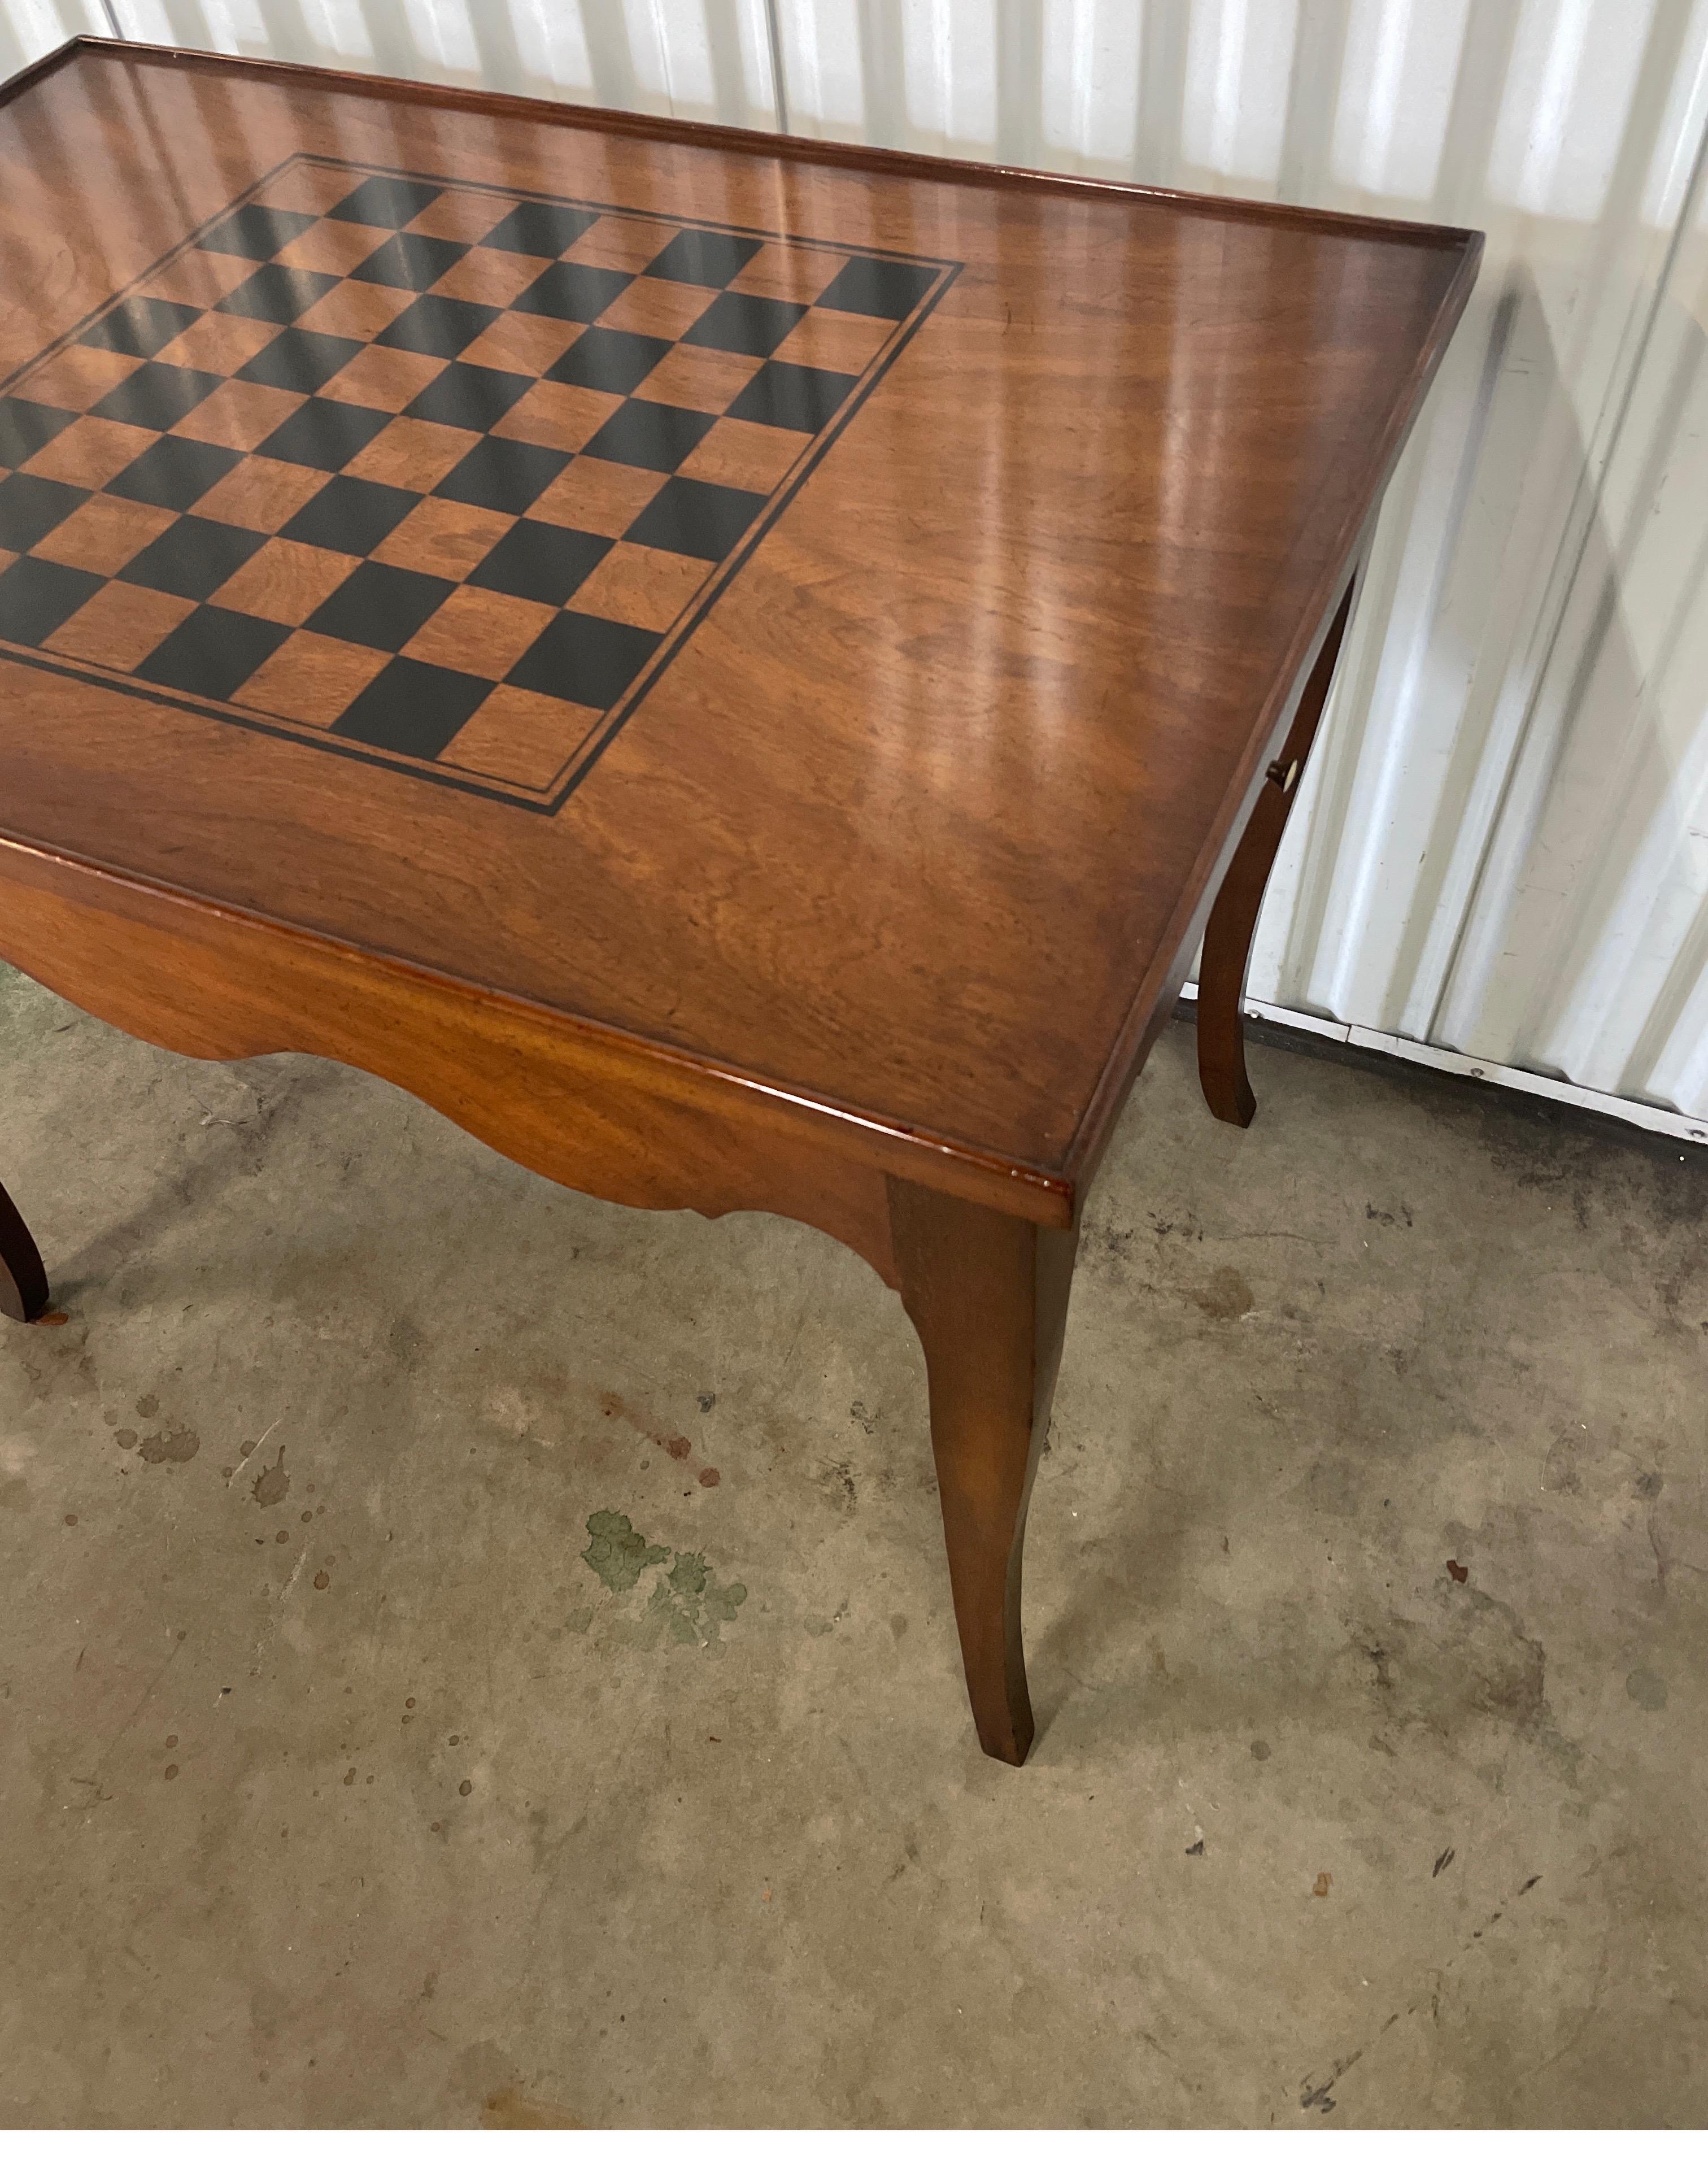 Louis XV style game table with a chessboard top. The top removes to reveal backgammon interior. There is a scalloped apron and pull outs on each side.